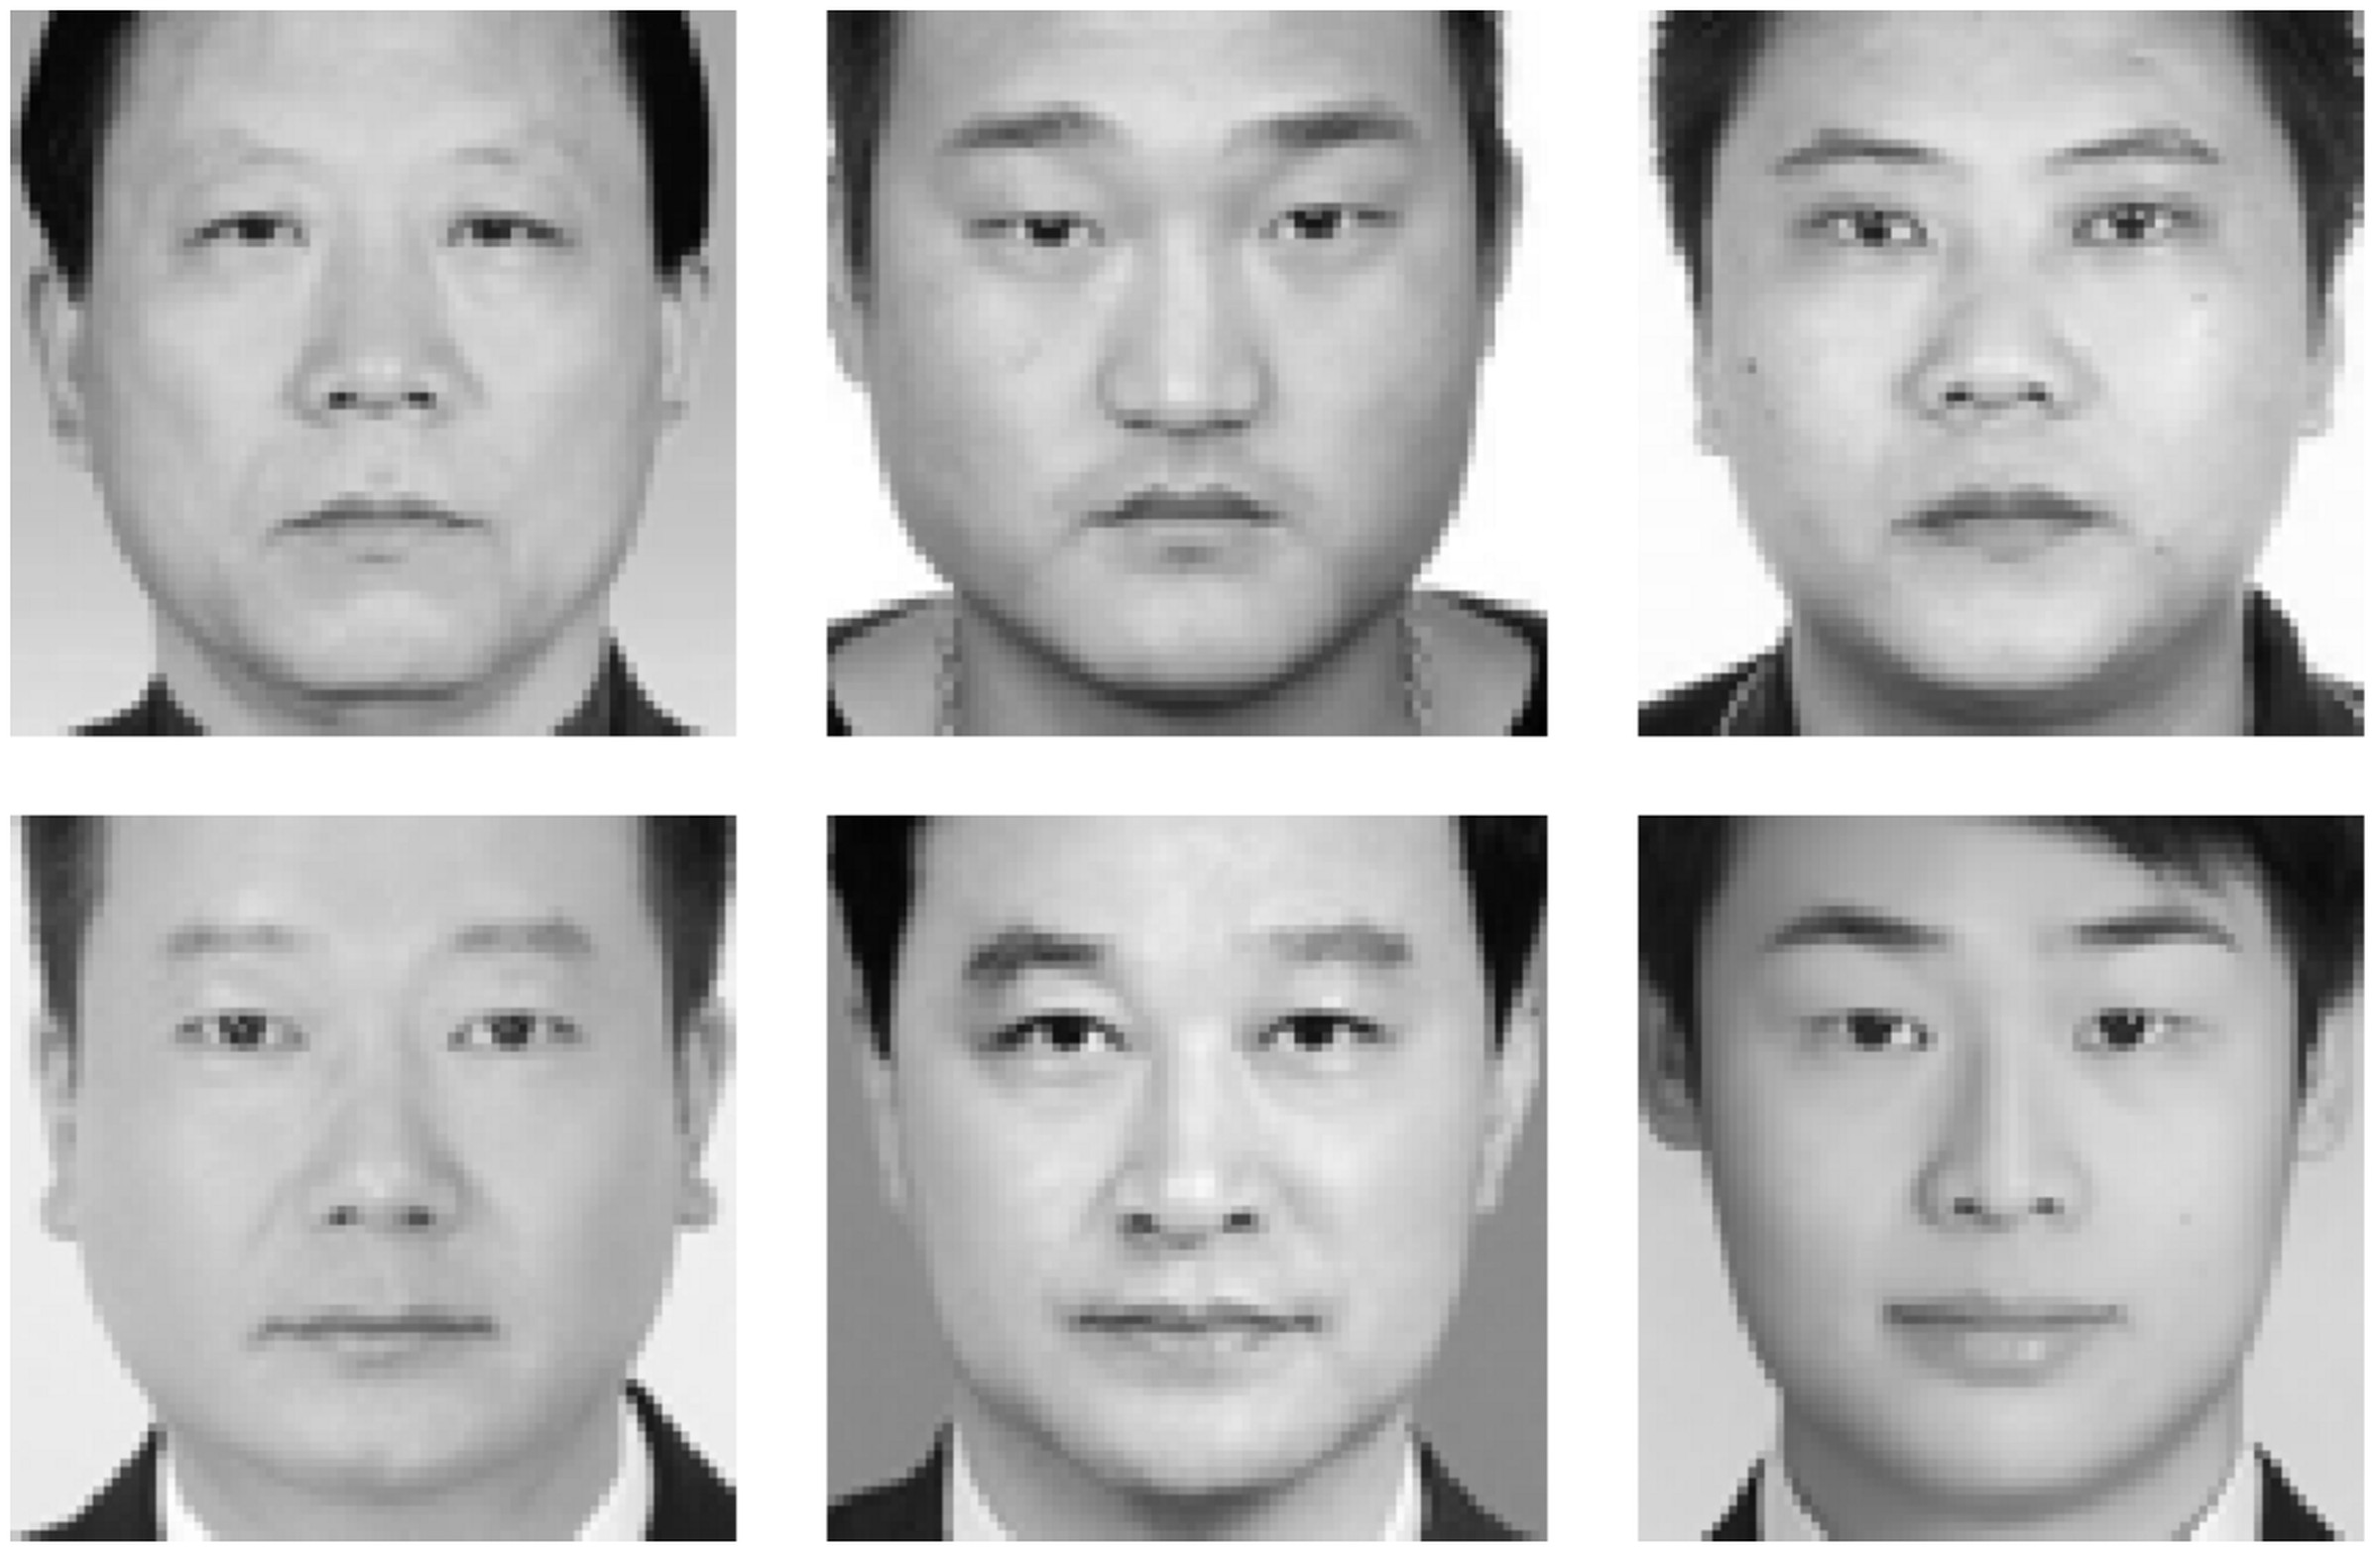 Images used in a 2016 paper that claimed to predict criminality from facial features. The top row shows “criminal” faces while the bottom row shows “non-criminals.”